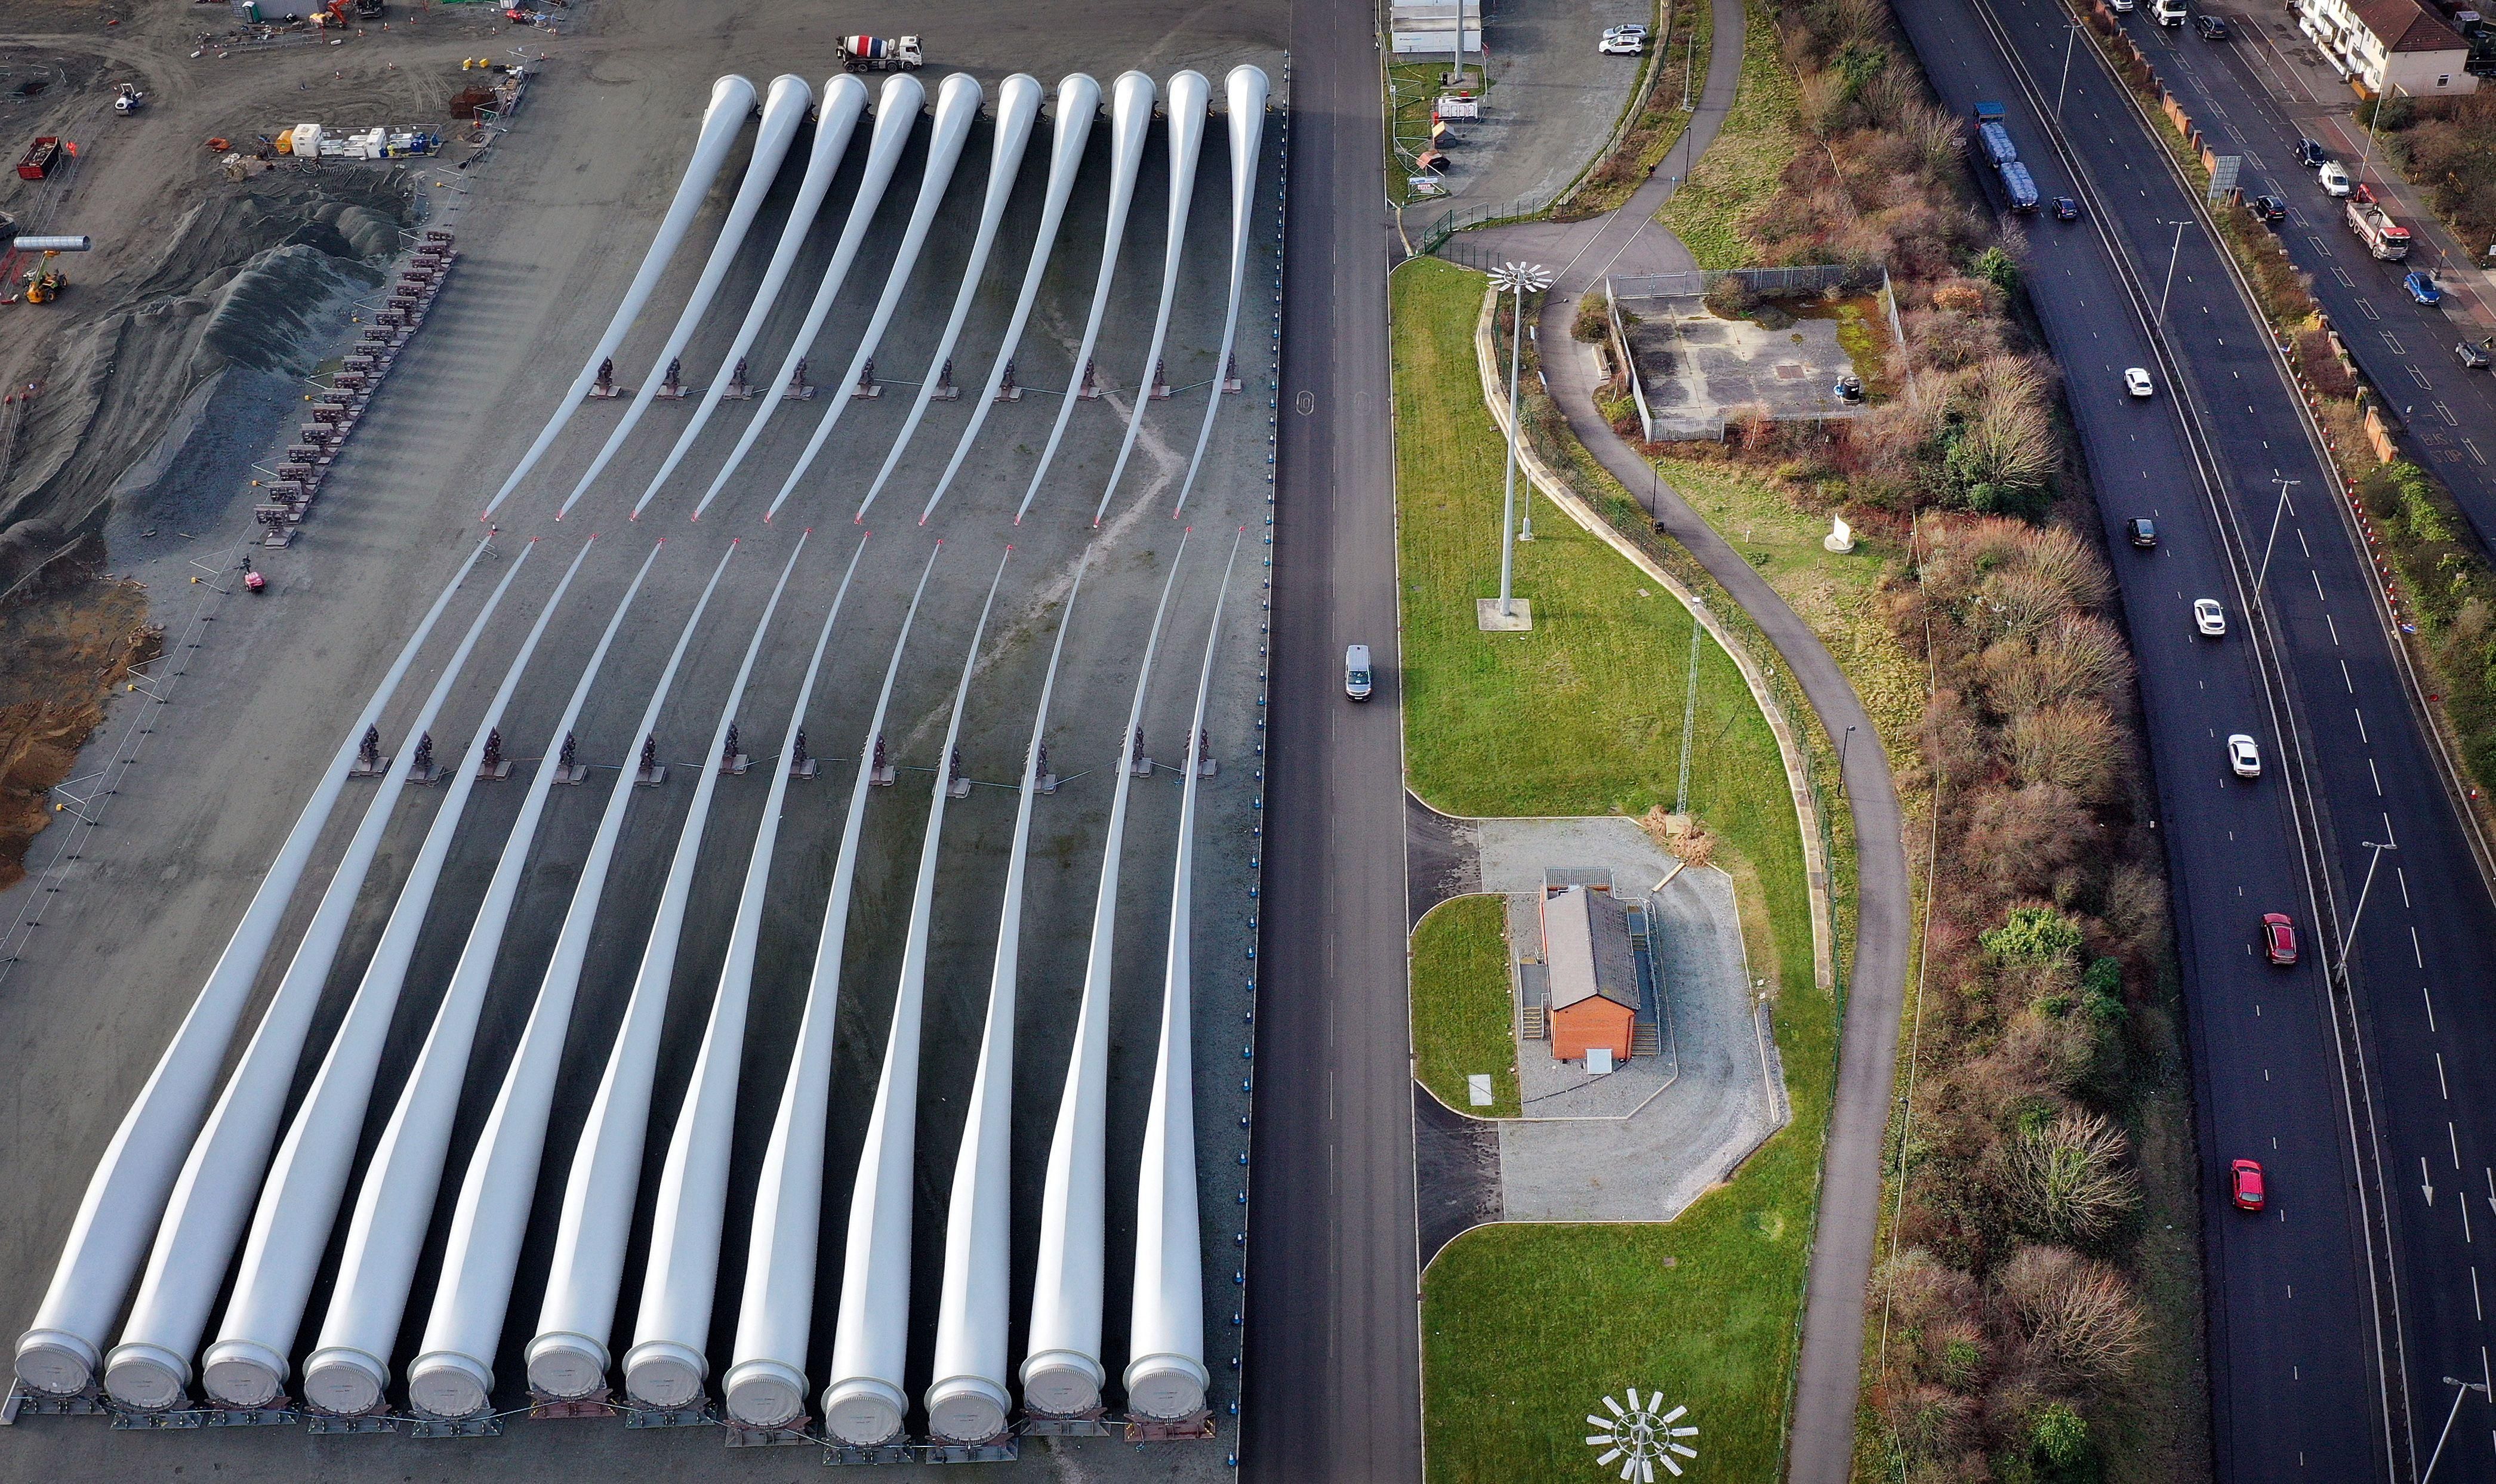 22 giant white fan blades sit parked adjacent to a highway in Hull, northeast England. The blades were manufactured for 20 to 30 years of service generating electricity on wind turbines before they\u2019re broken down and recycled for their next environmentally friendly use.